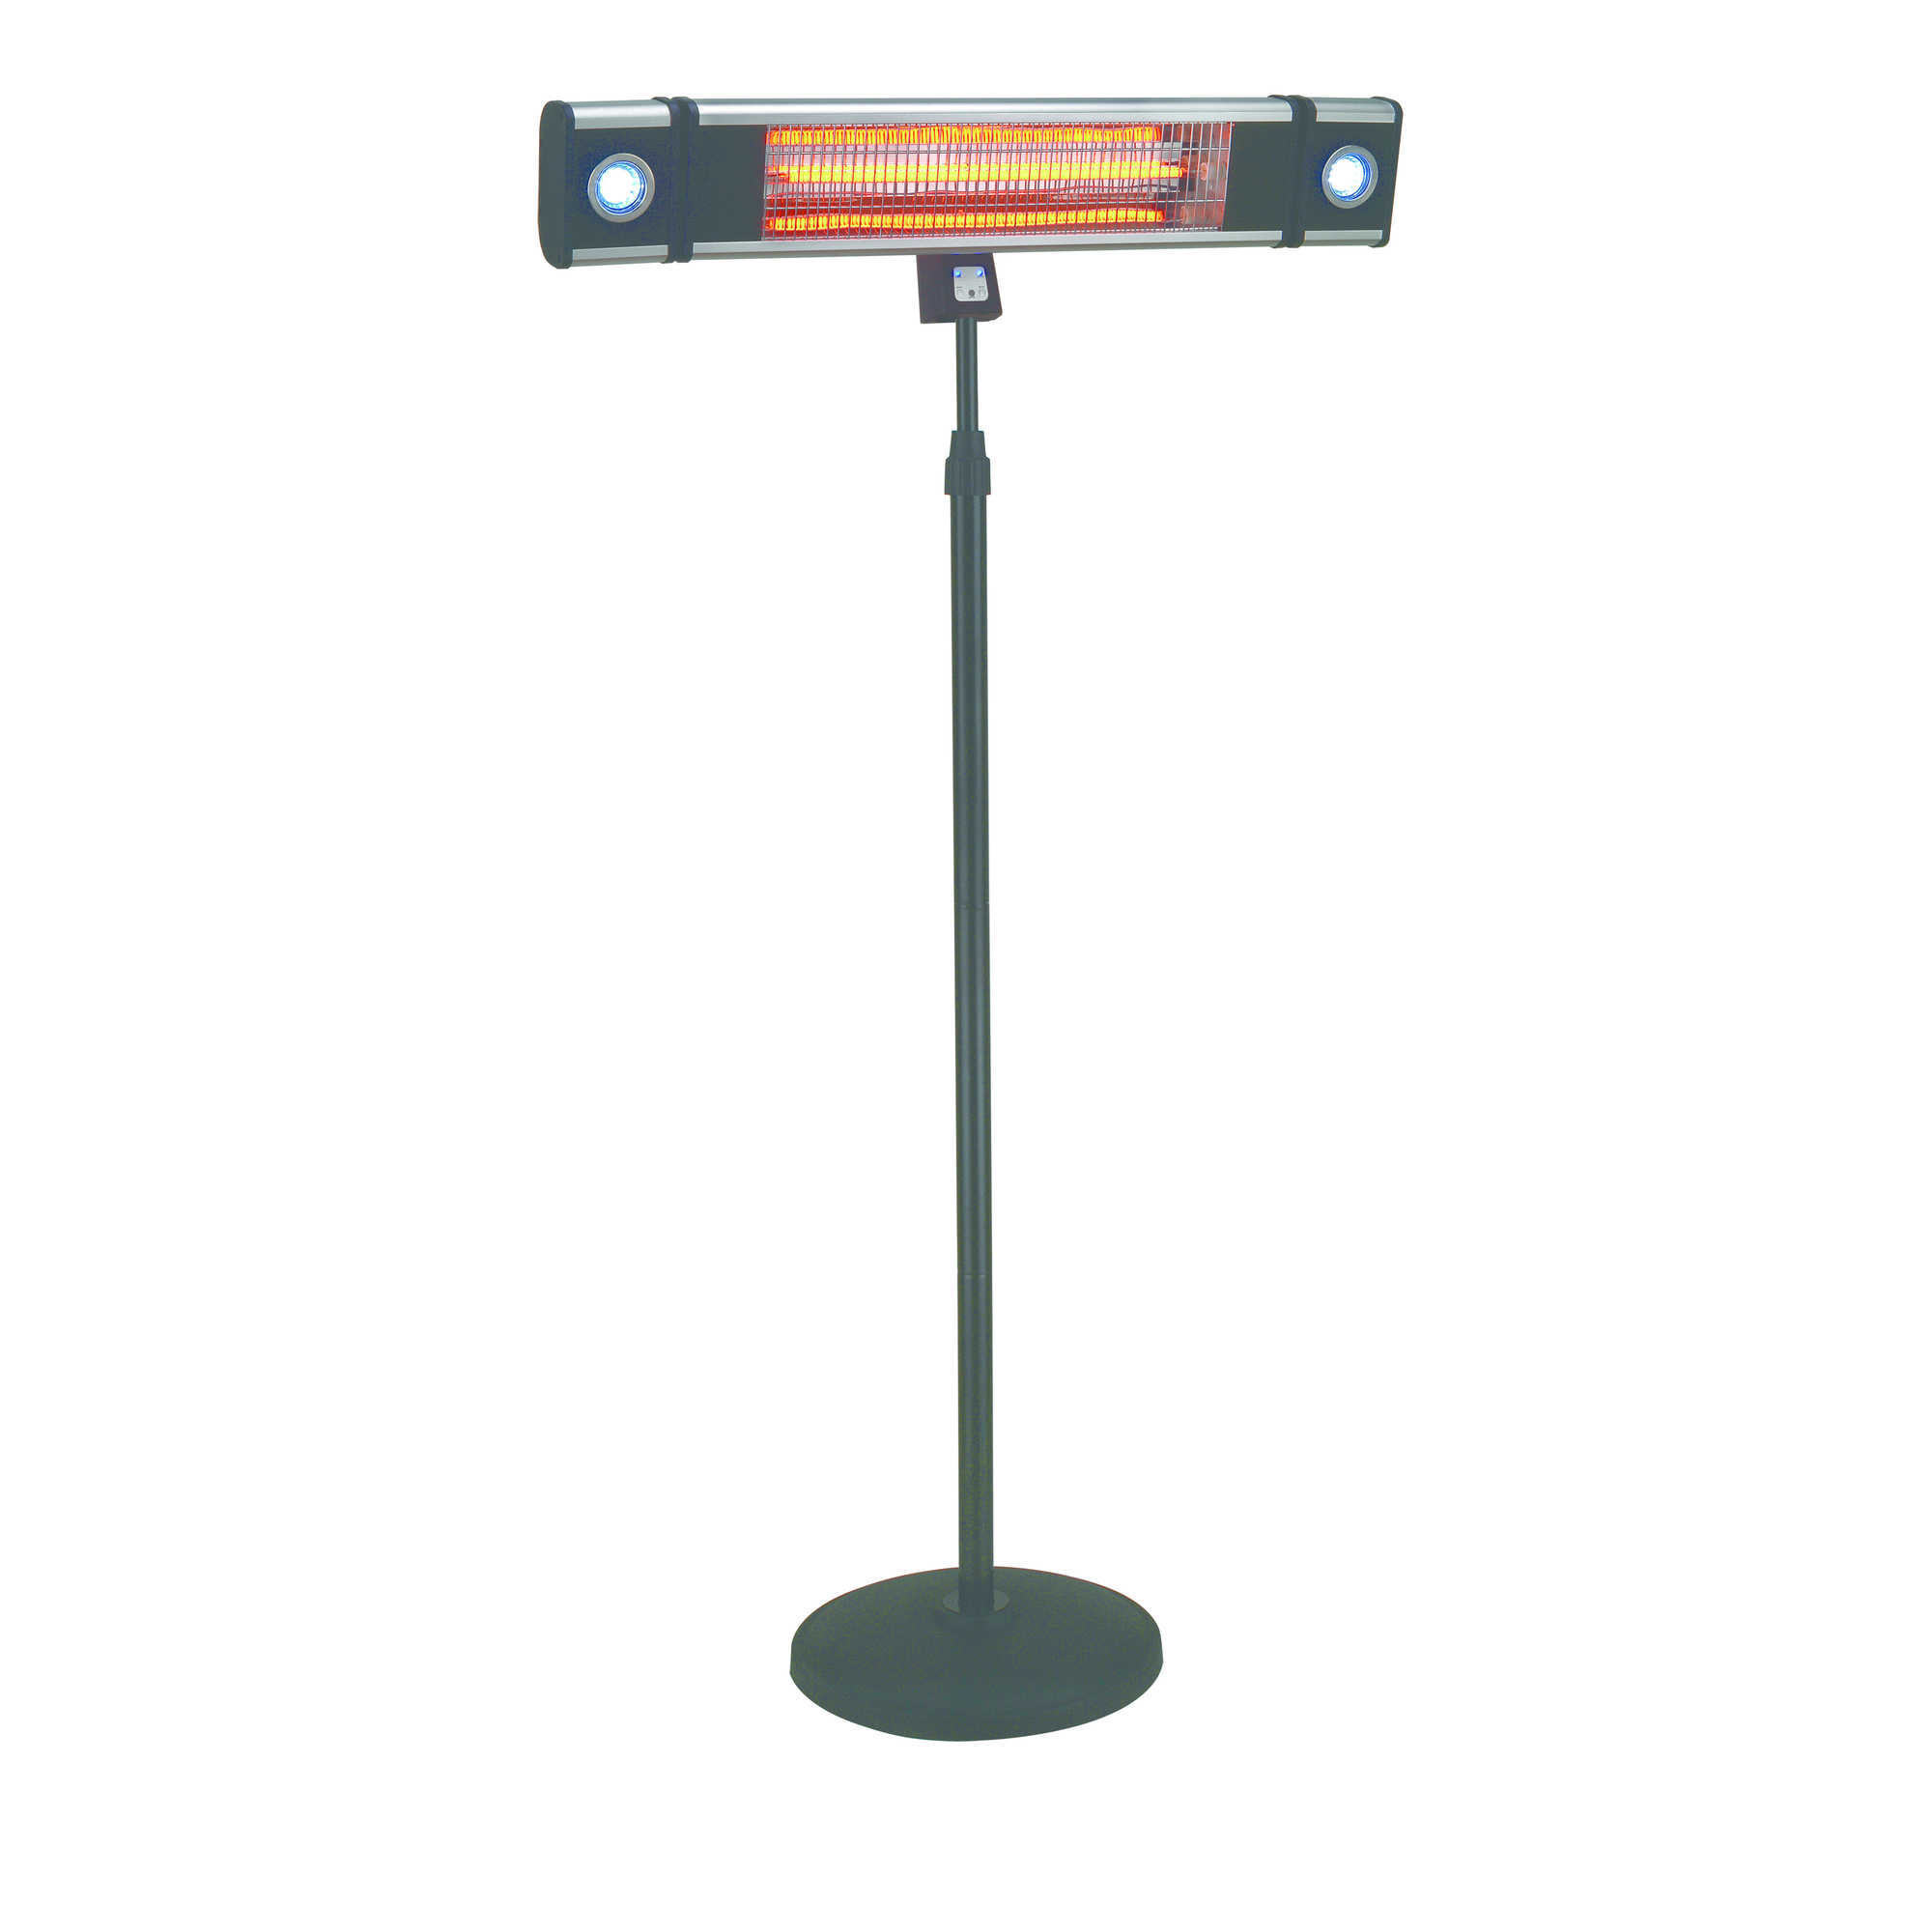 ENERG+, Pole mounted patio heater with LED lights, Model HEA-218CSLR